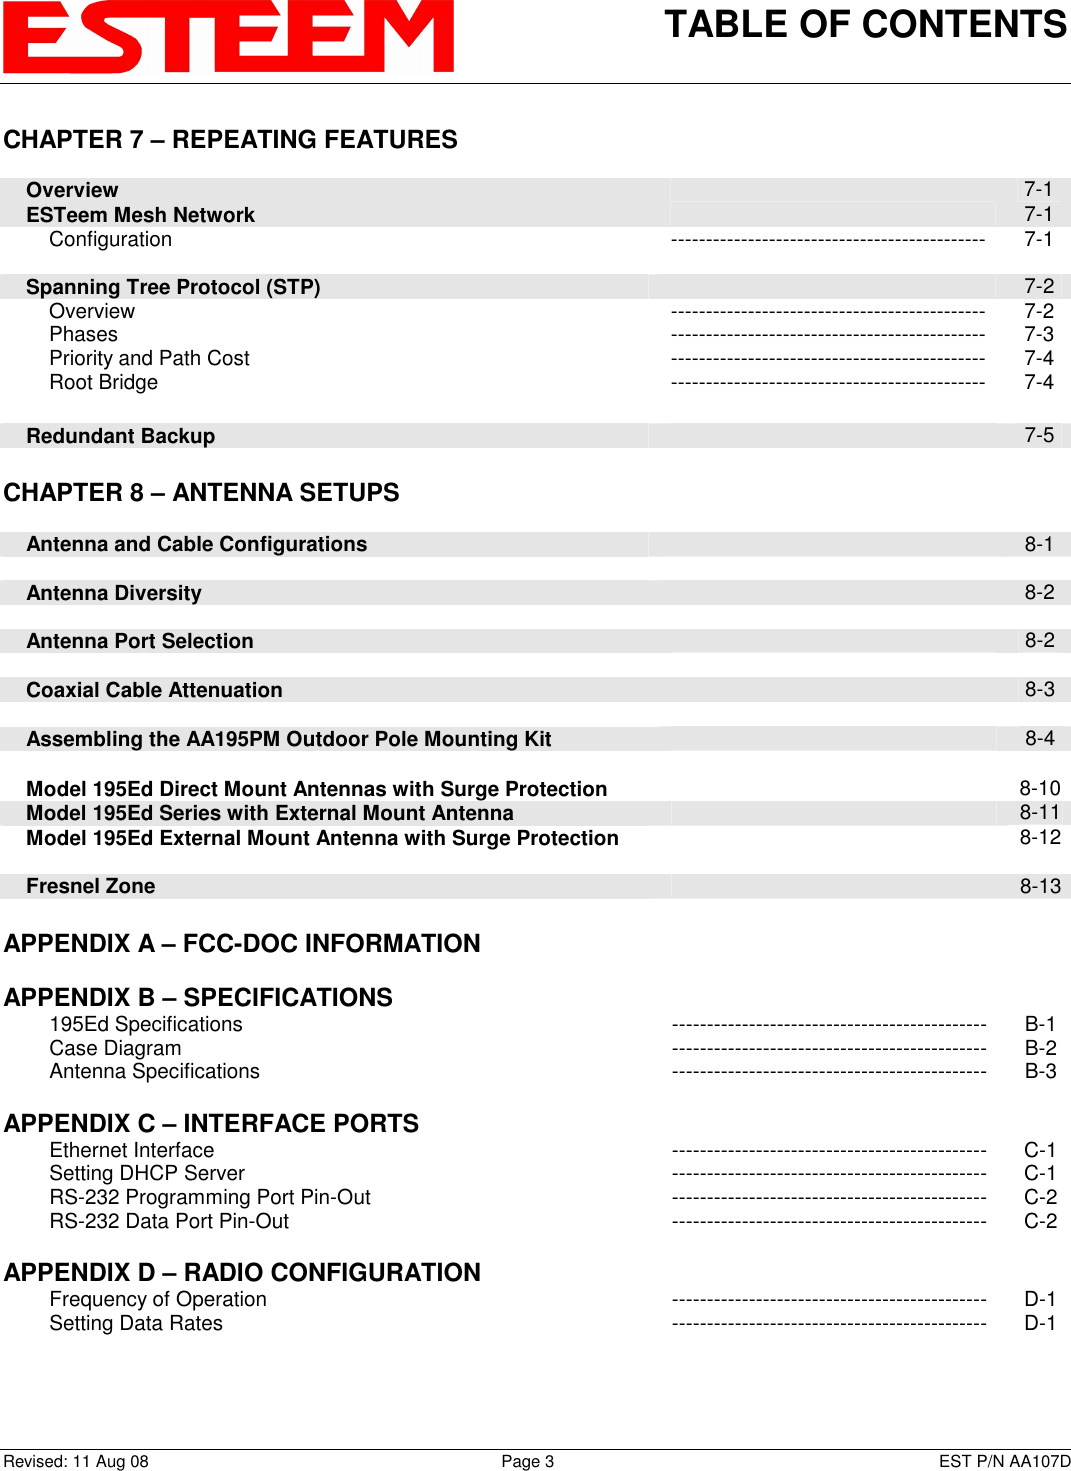 TABLE OF CONTENTS    Revised: 11 Aug 08  Page 3  EST P/N AA107D CHAPTER 7 – REPEATING FEATURES             Overview   7-1     ESTeem Mesh Network   7-1         Configuration  ---------------------------------------------  7-1          Spanning Tree Protocol (STP)   7-2         Overview  ---------------------------------------------  7-2         Phases  ---------------------------------------------  7-3         Priority and Path Cost  ---------------------------------------------  7-4         Root Bridge  ---------------------------------------------  7-4         Redundant Backup   7-5     CHAPTER 8 – ANTENNA SETUPS            Antenna and Cable Configurations   8-1          Antenna Diversity   8-2          Antenna Port Selection   8-2          Coaxial Cable Attenuation   8-3         Assembling the AA195PM Outdoor Pole Mounting Kit   8-4         Model 195Ed Direct Mount Antennas with Surge Protection   8-10     Model 195Ed Series with External Mount Antenna   8-11     Model 195Ed External Mount Antenna with Surge Protection    8-12        Fresnel Zone    8-13    APPENDIX A – FCC-DOC INFORMATION       APPENDIX B – SPECIFICATIONS            195Ed Specifications  ---------------------------------------------  B-1         Case Diagram  ---------------------------------------------  B-2         Antenna Specifications  ---------------------------------------------  B-3    APPENDIX C – INTERFACE PORTS            Ethernet Interface  ---------------------------------------------  C-1         Setting DHCP Server  ---------------------------------------------  C-1         RS-232 Programming Port Pin-Out  ---------------------------------------------  C-2         RS-232 Data Port Pin-Out  ---------------------------------------------  C-2    APPENDIX D – RADIO CONFIGURATION            Frequency of Operation  ---------------------------------------------  D-1         Setting Data Rates  ---------------------------------------------  D-1 